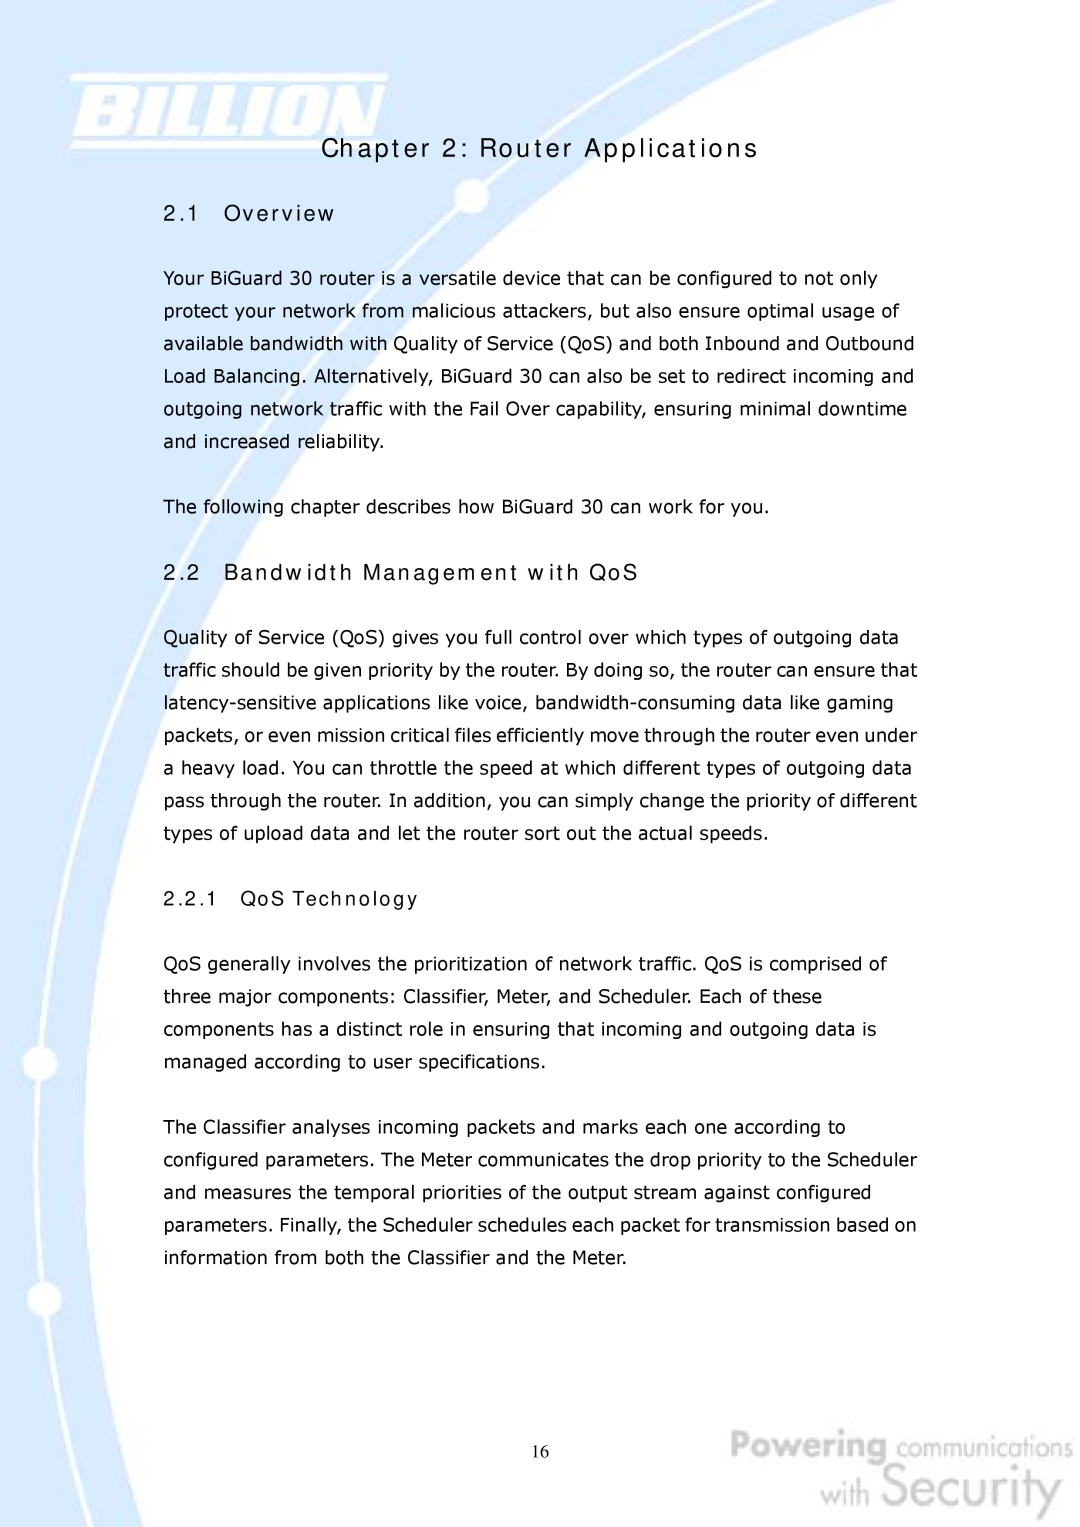 Billion Electric Company 30 user manual Overview, Bandwidth Management with QoS, Router Applications, QoS Technology 